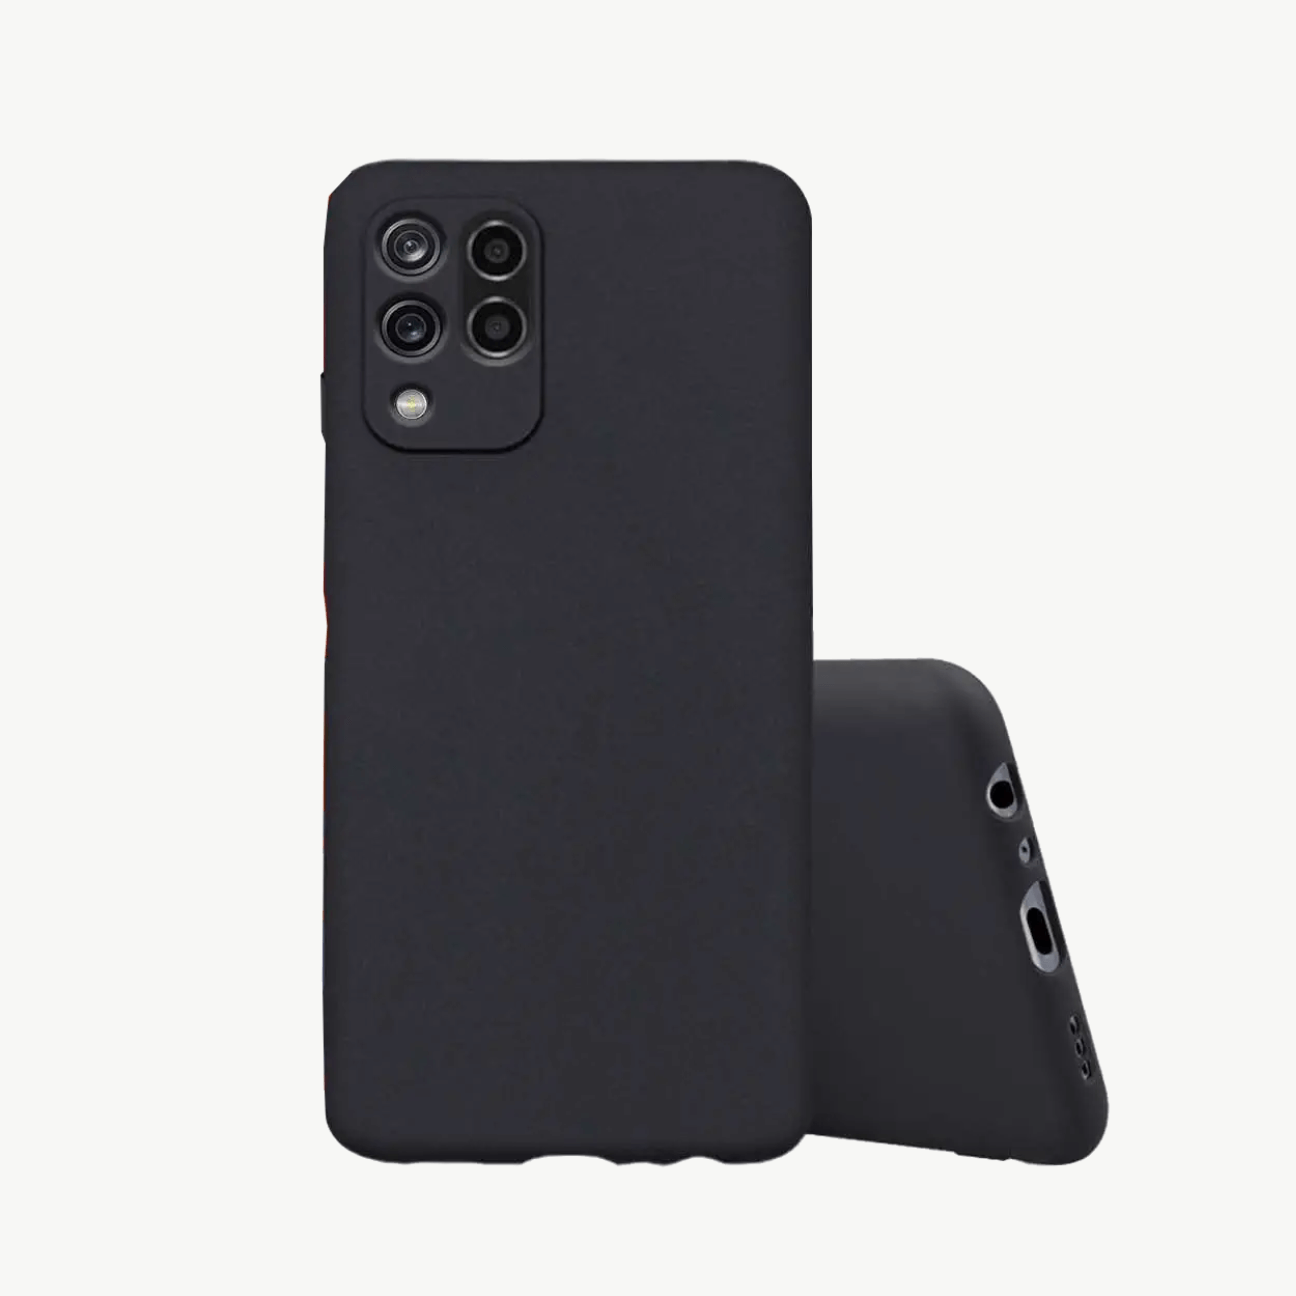 Oppo Find X2 Pro (2020) Black Soft Silicone Phone Case Image